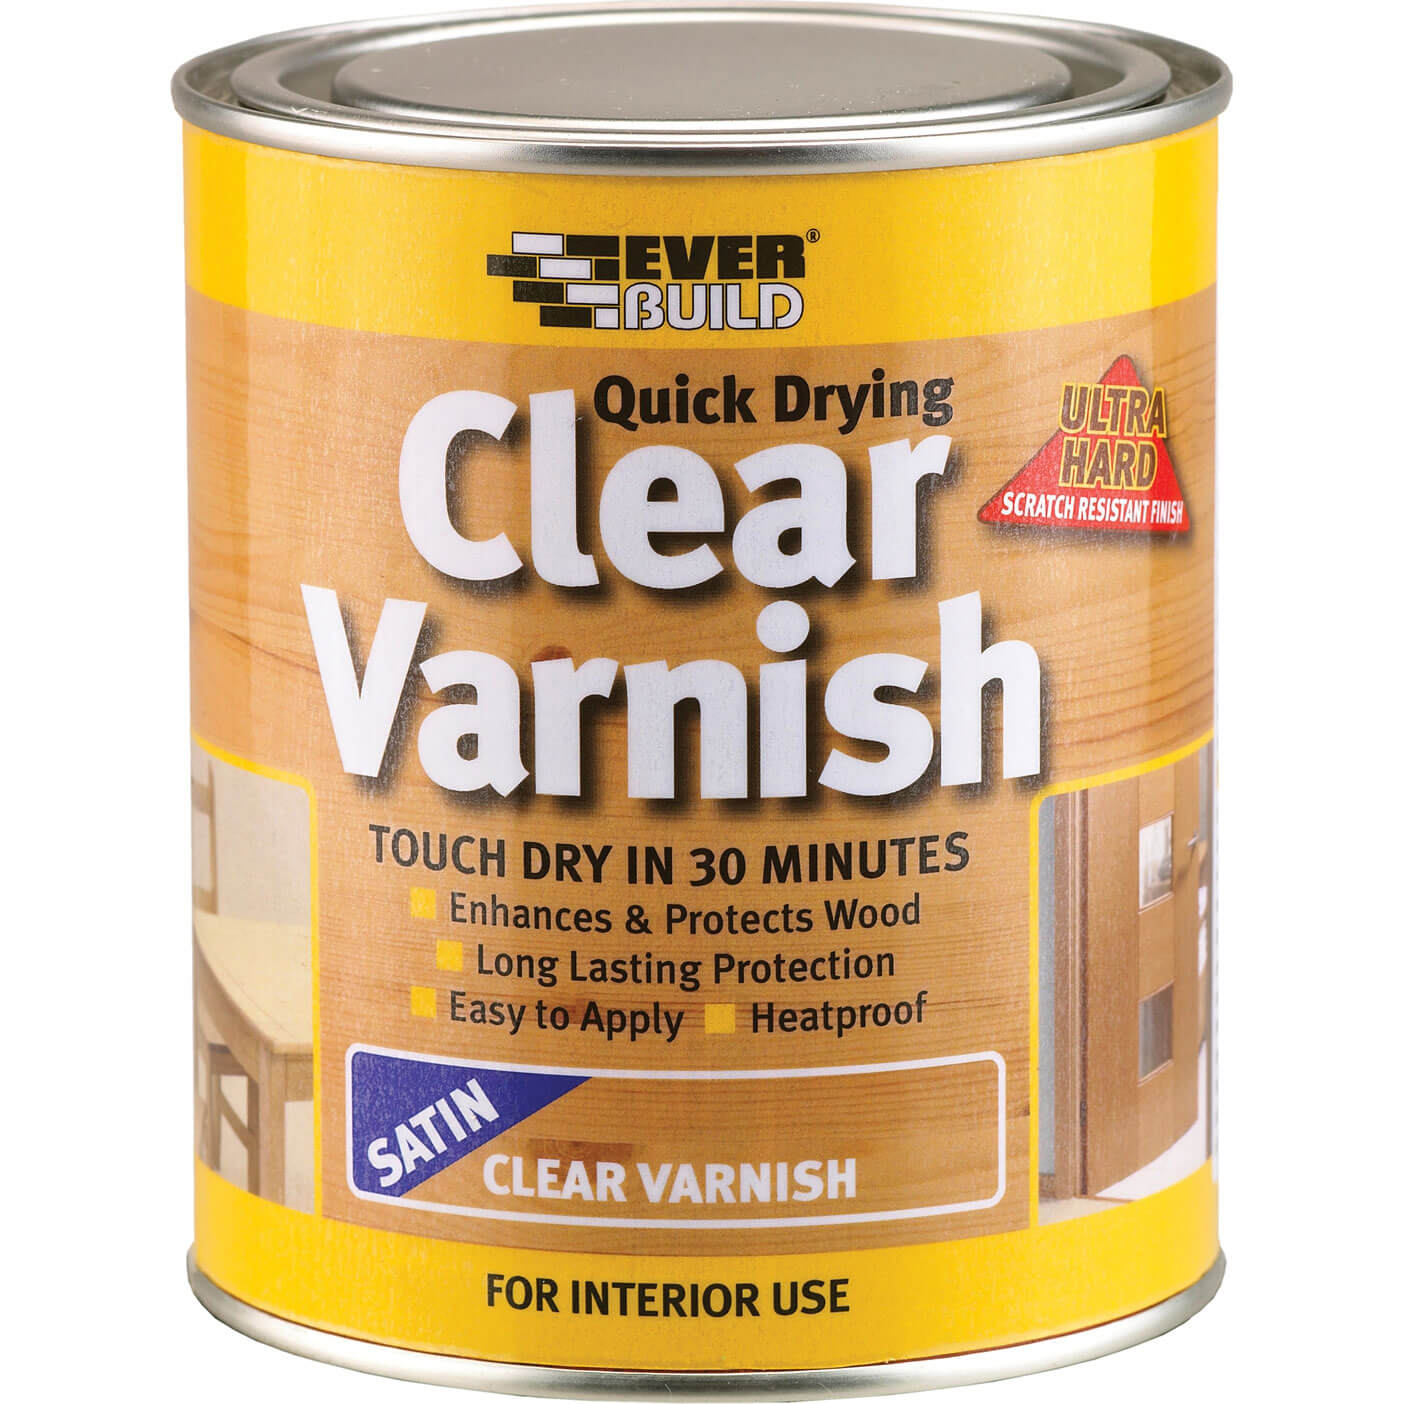 Image of Everbuild Quick Drying Wood Varnish Clear Satin 750ml